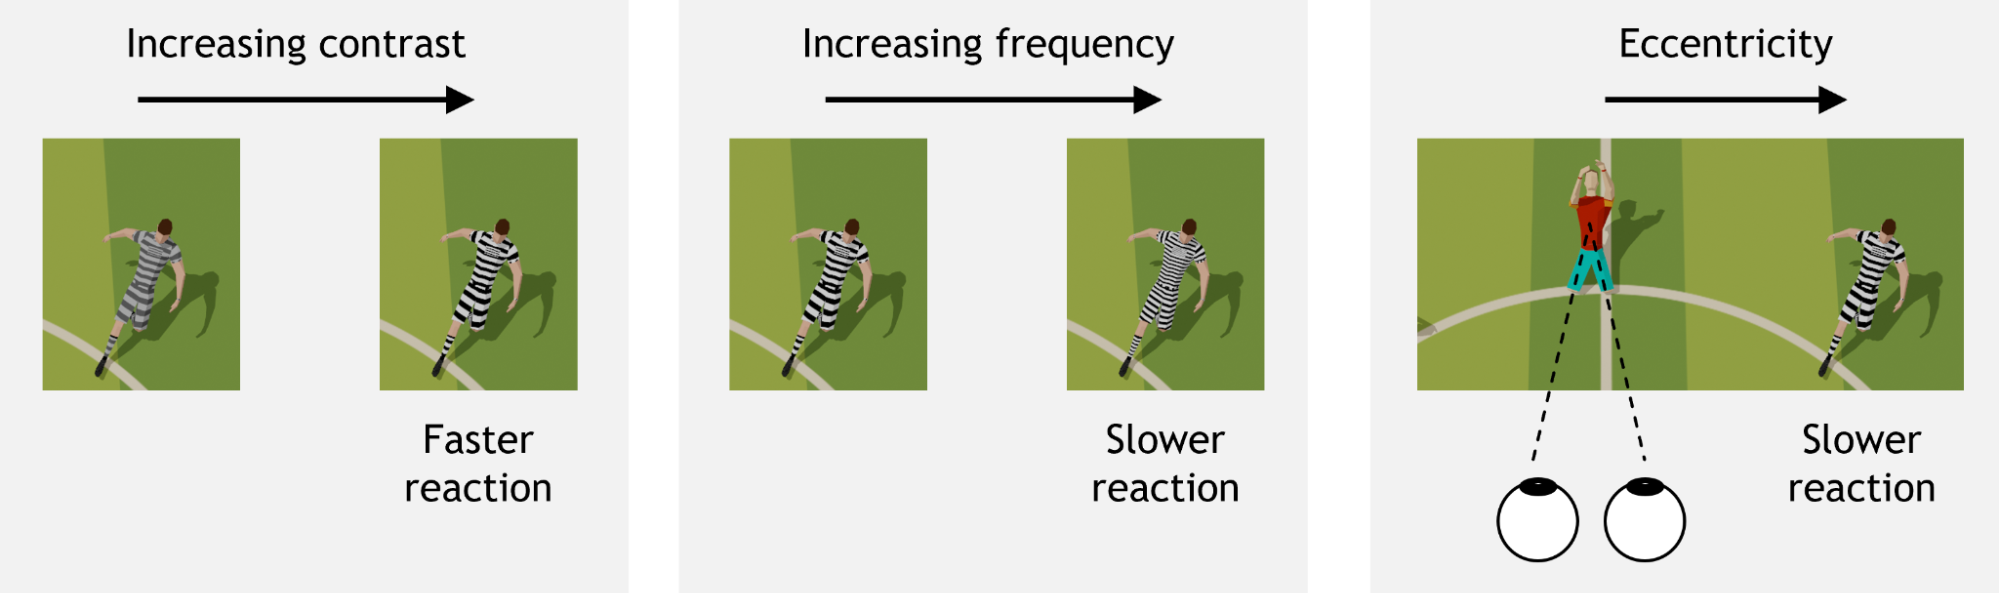 Graphic showing yhree visual characteristics that influence saccadic reaction time: contrast (left), frequency (center), and eccentricity (right)